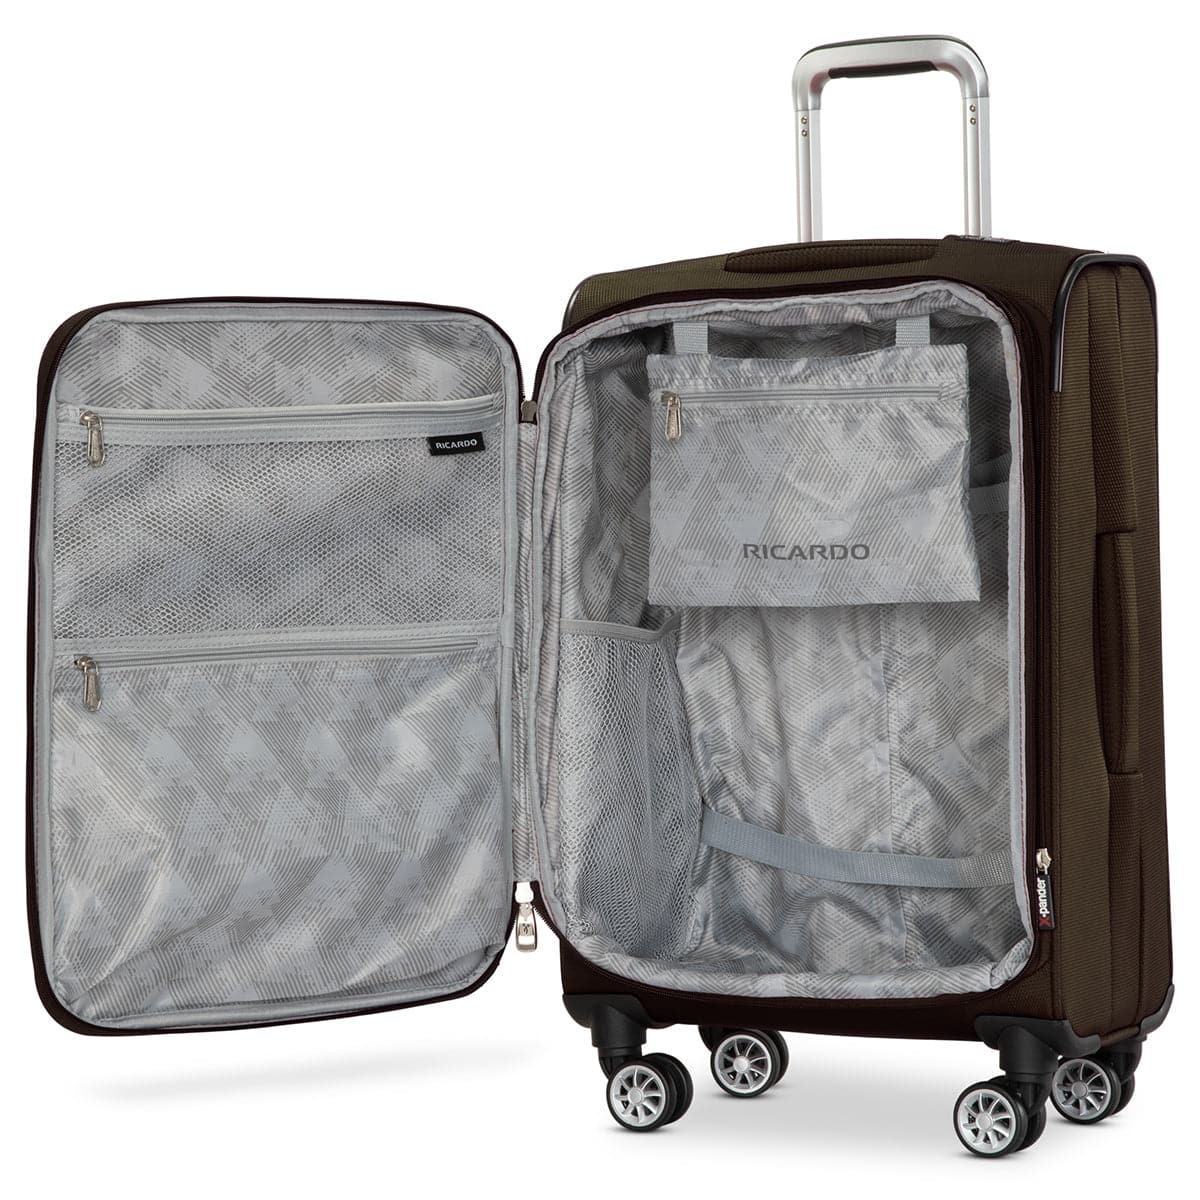 Ricardo Beverly Hills Hermosa Soft Side Carry-On Luggage